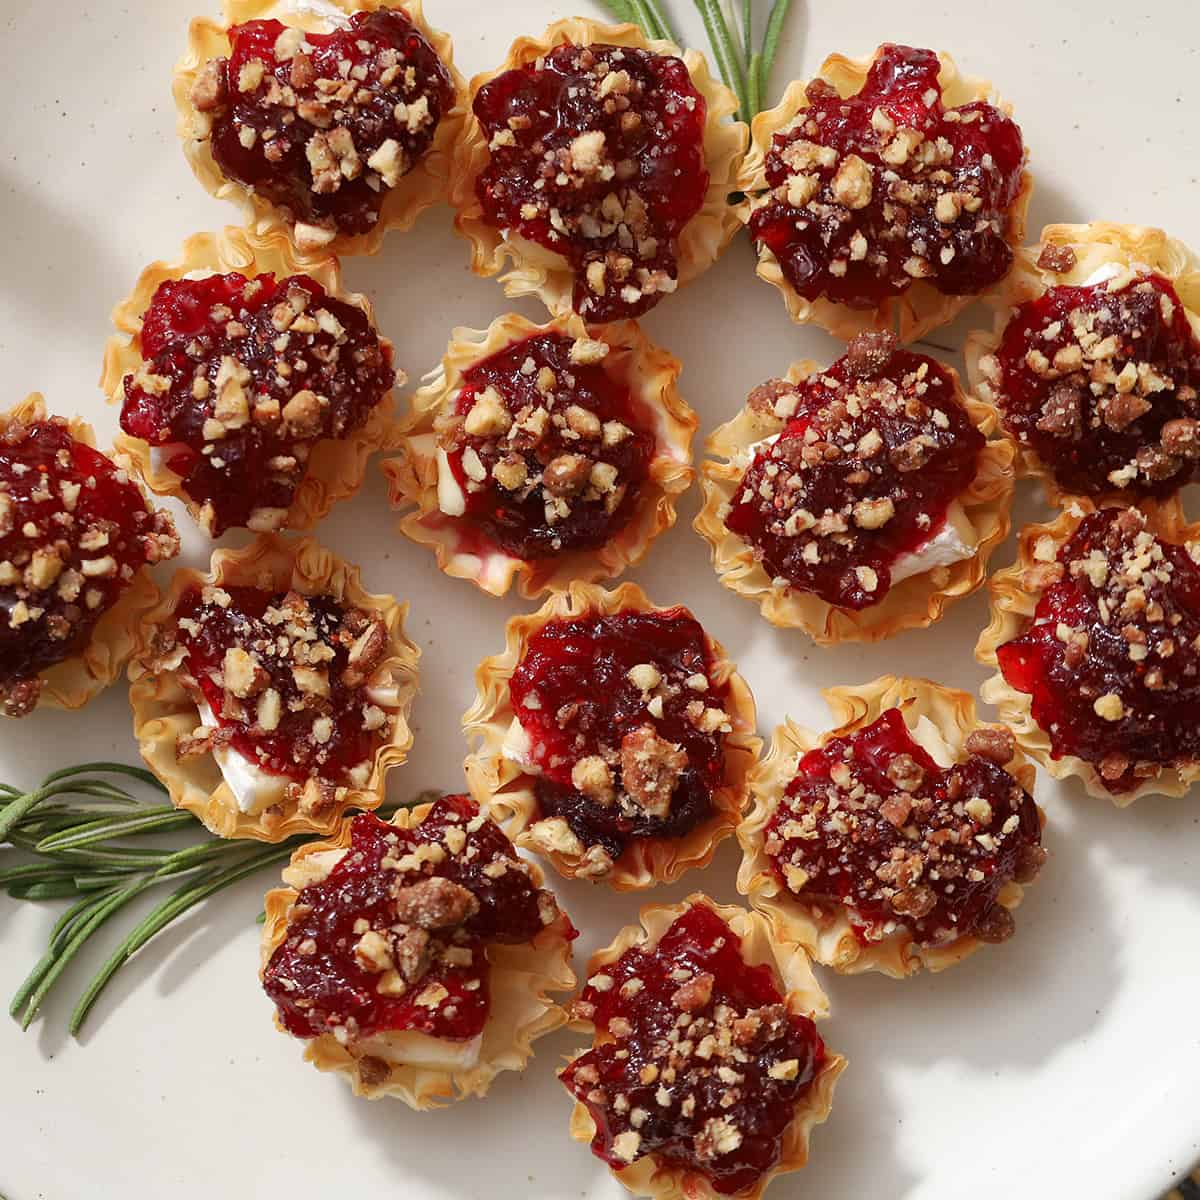 A plate of brie cheese and cranberry bites.